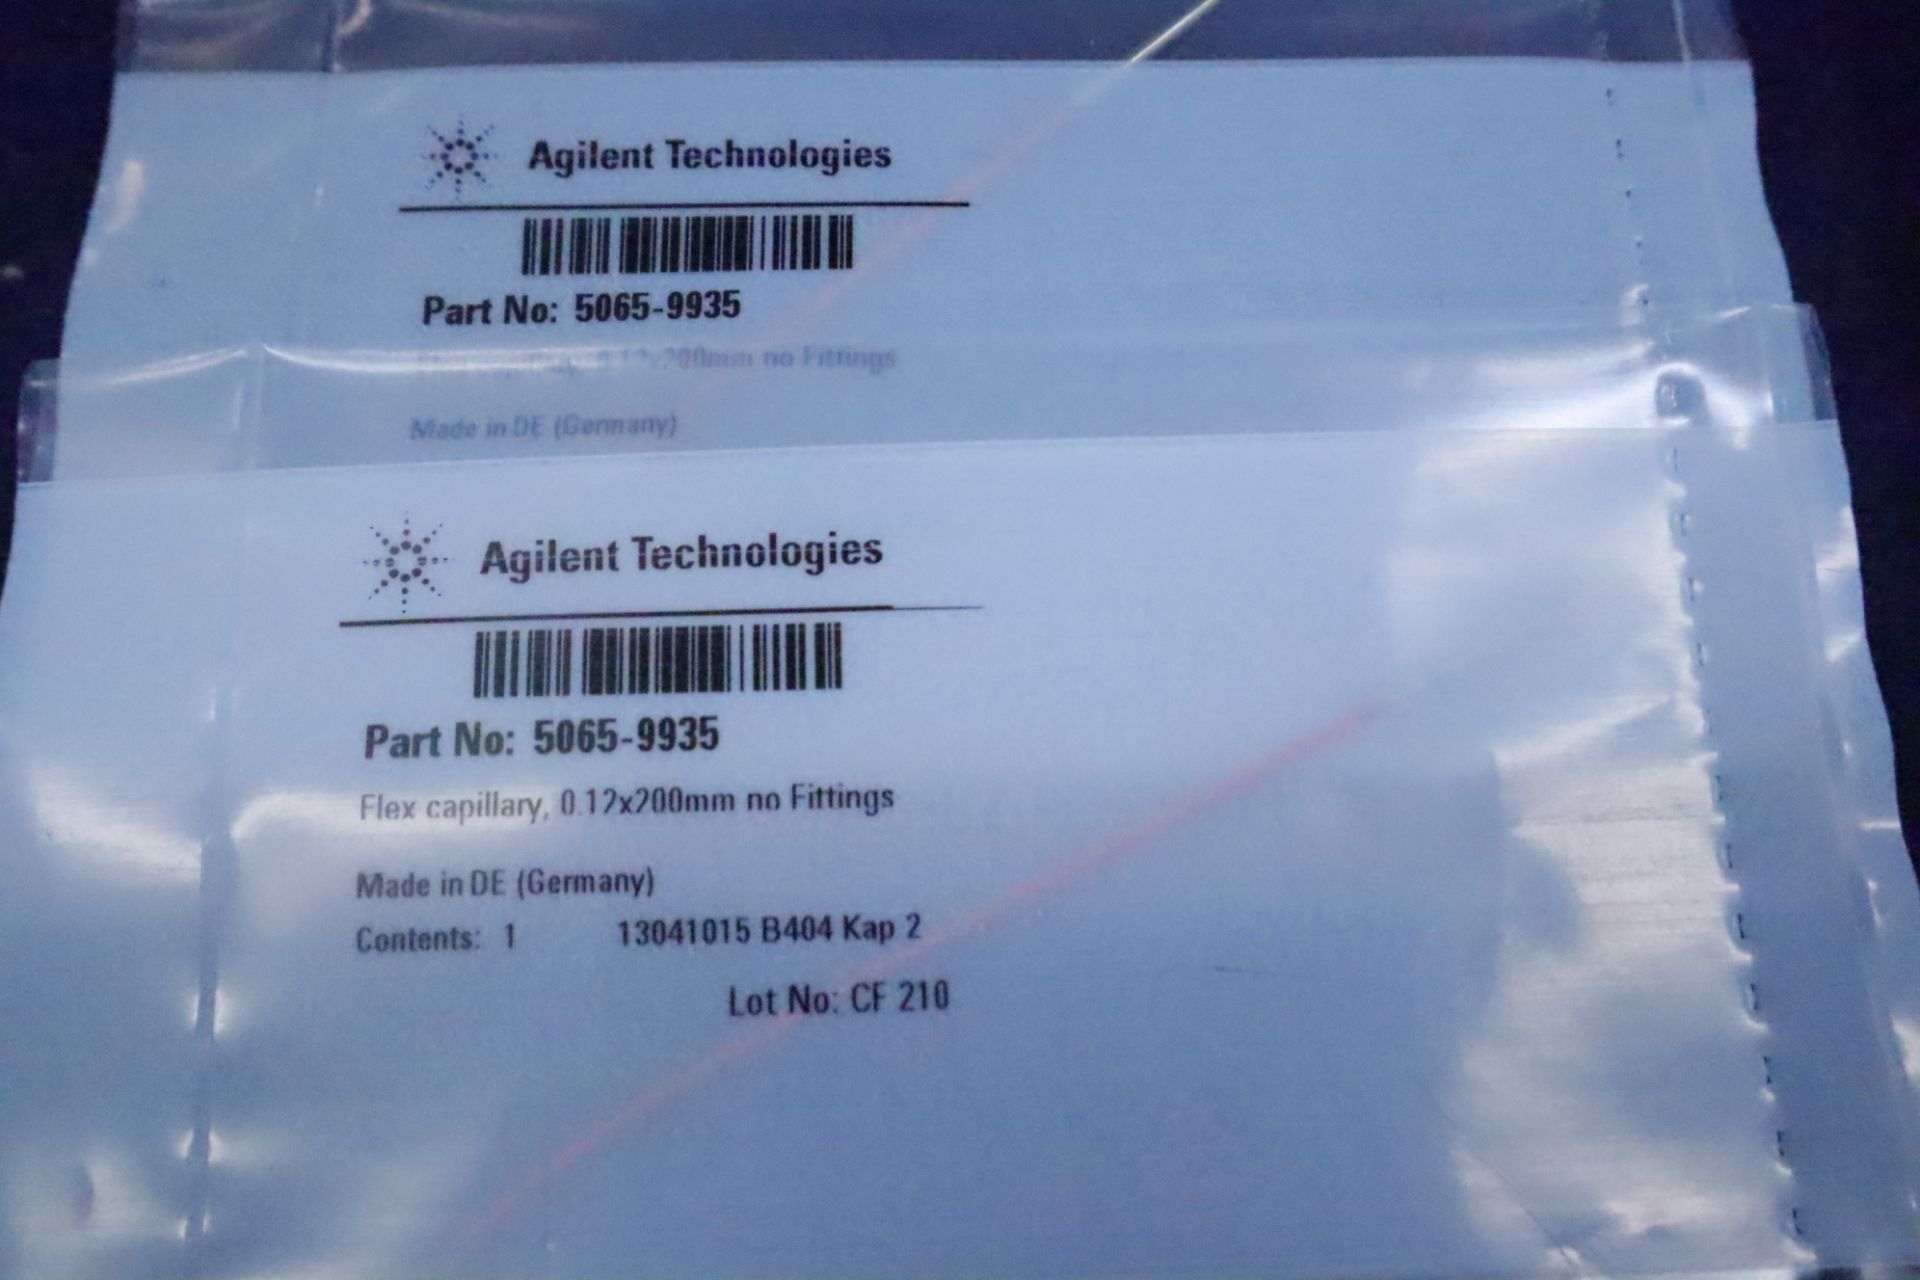 (NIB) Agilent Technologies OEM Replacement Parts for LC/MS Machines - Image 13 of 24